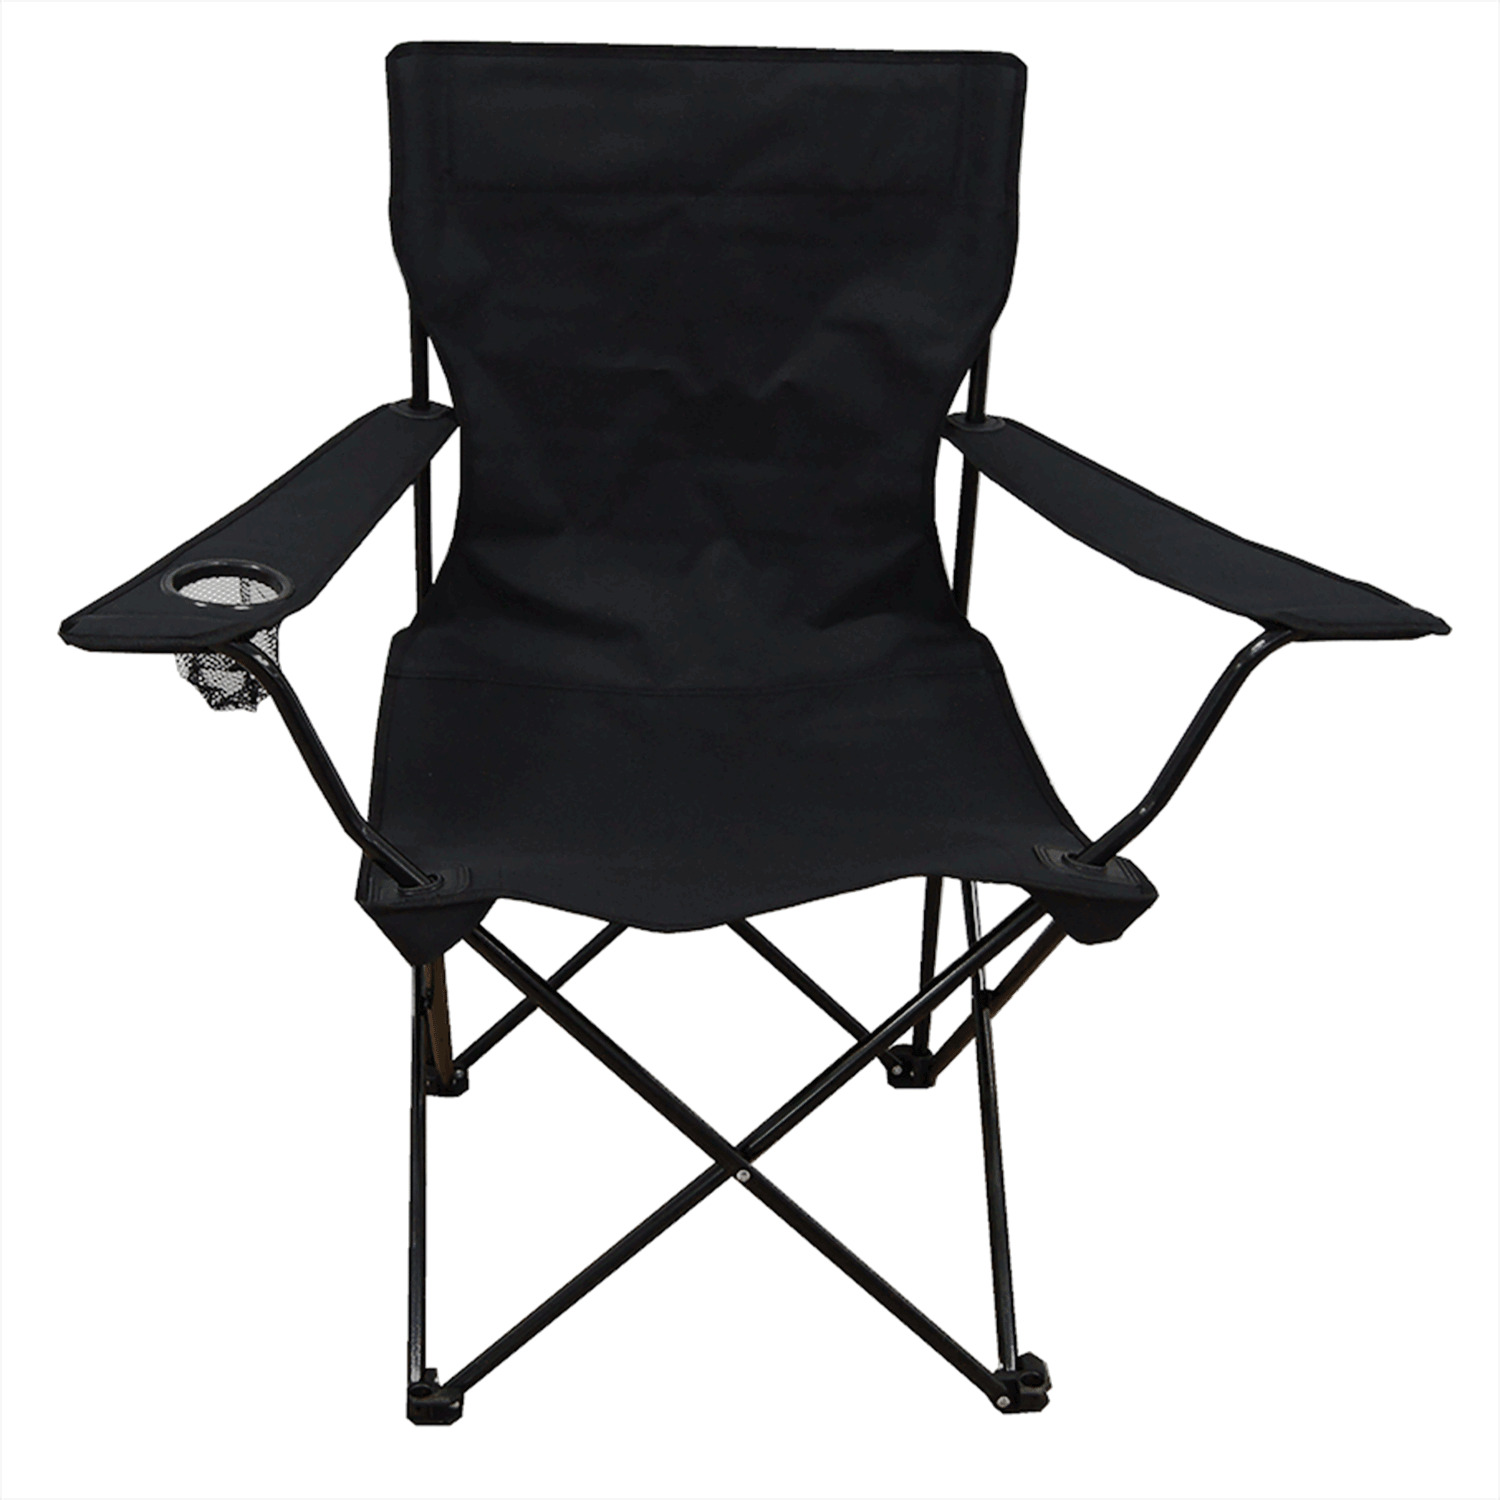 Folding camp chair with a mesh cup holder and armrest. Colour